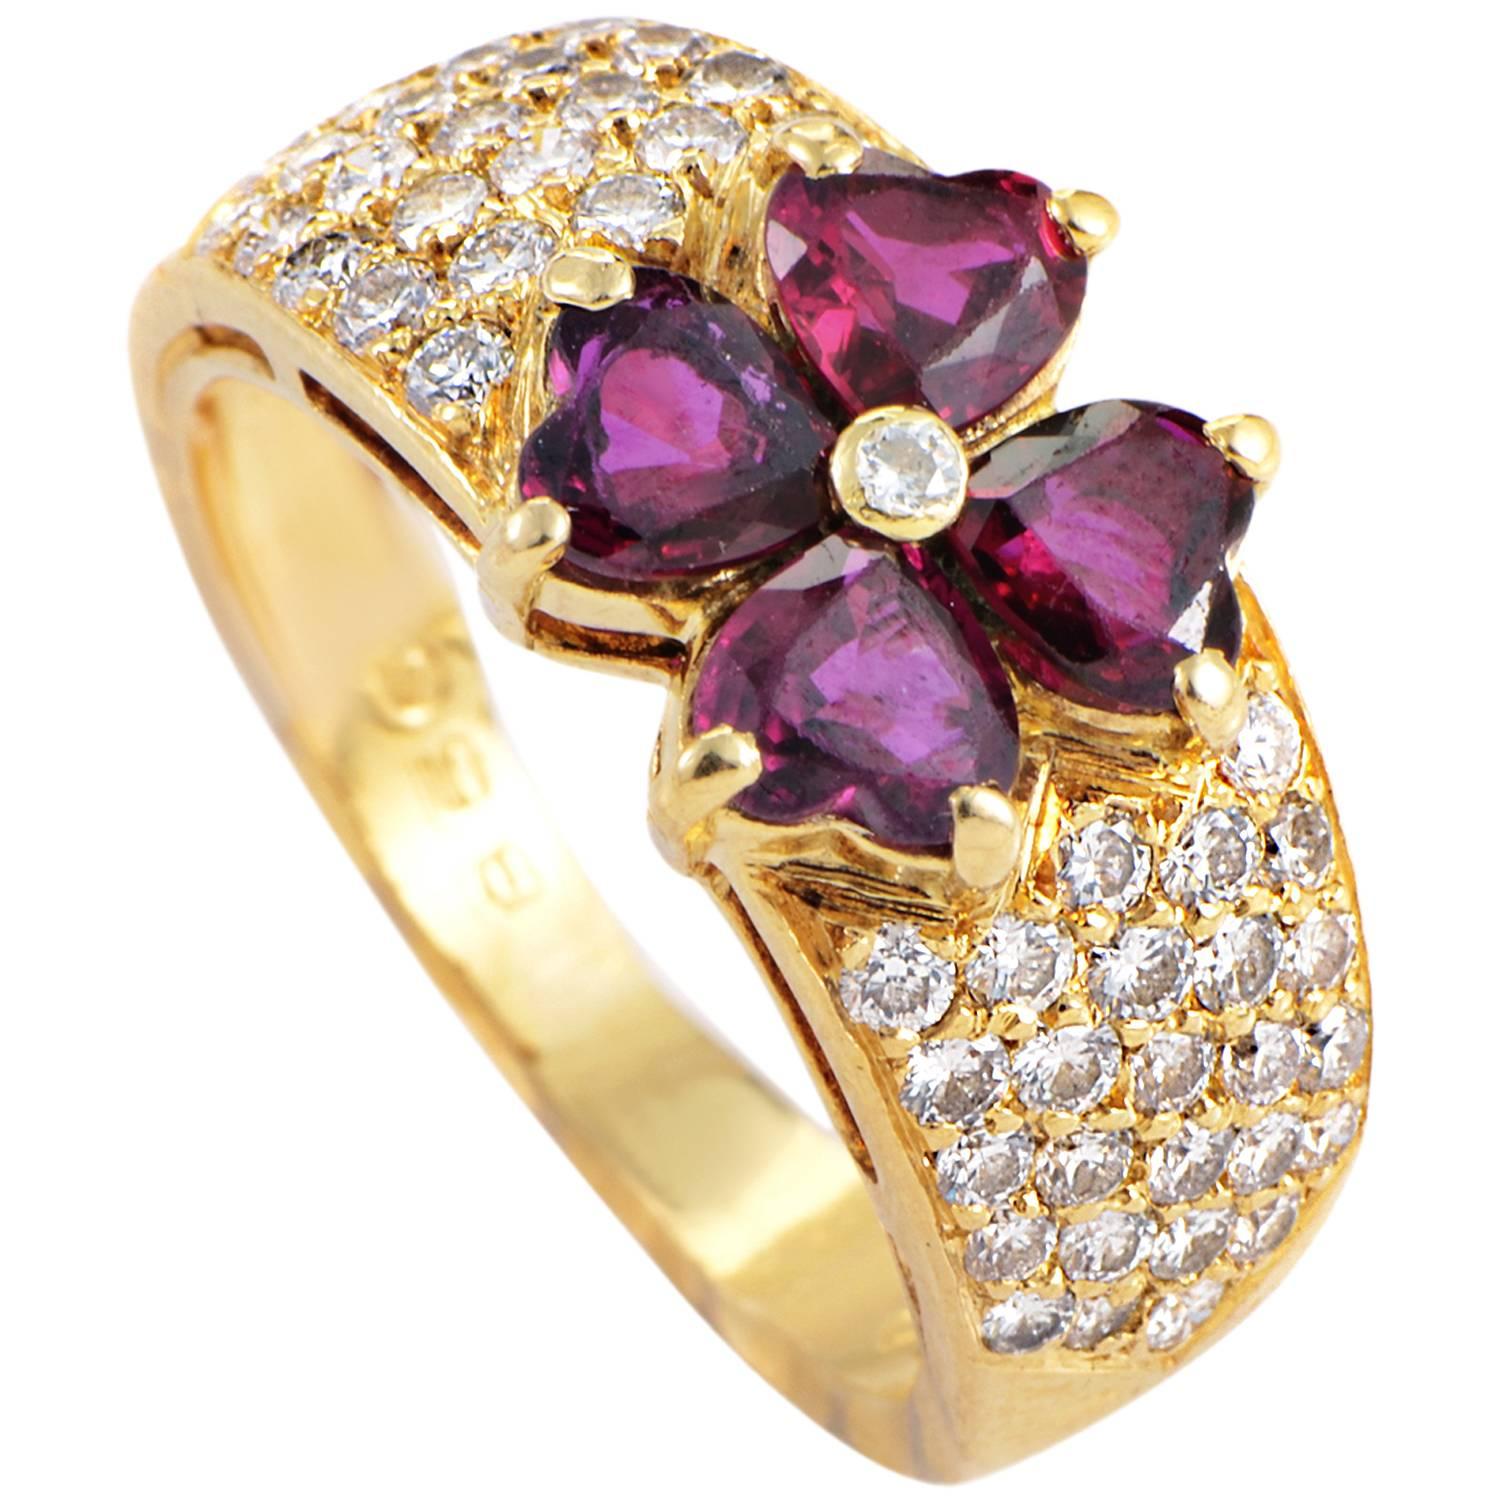 Van Cleef & Arpels Yellow Gold Diamond and Ruby Flower Band Ring